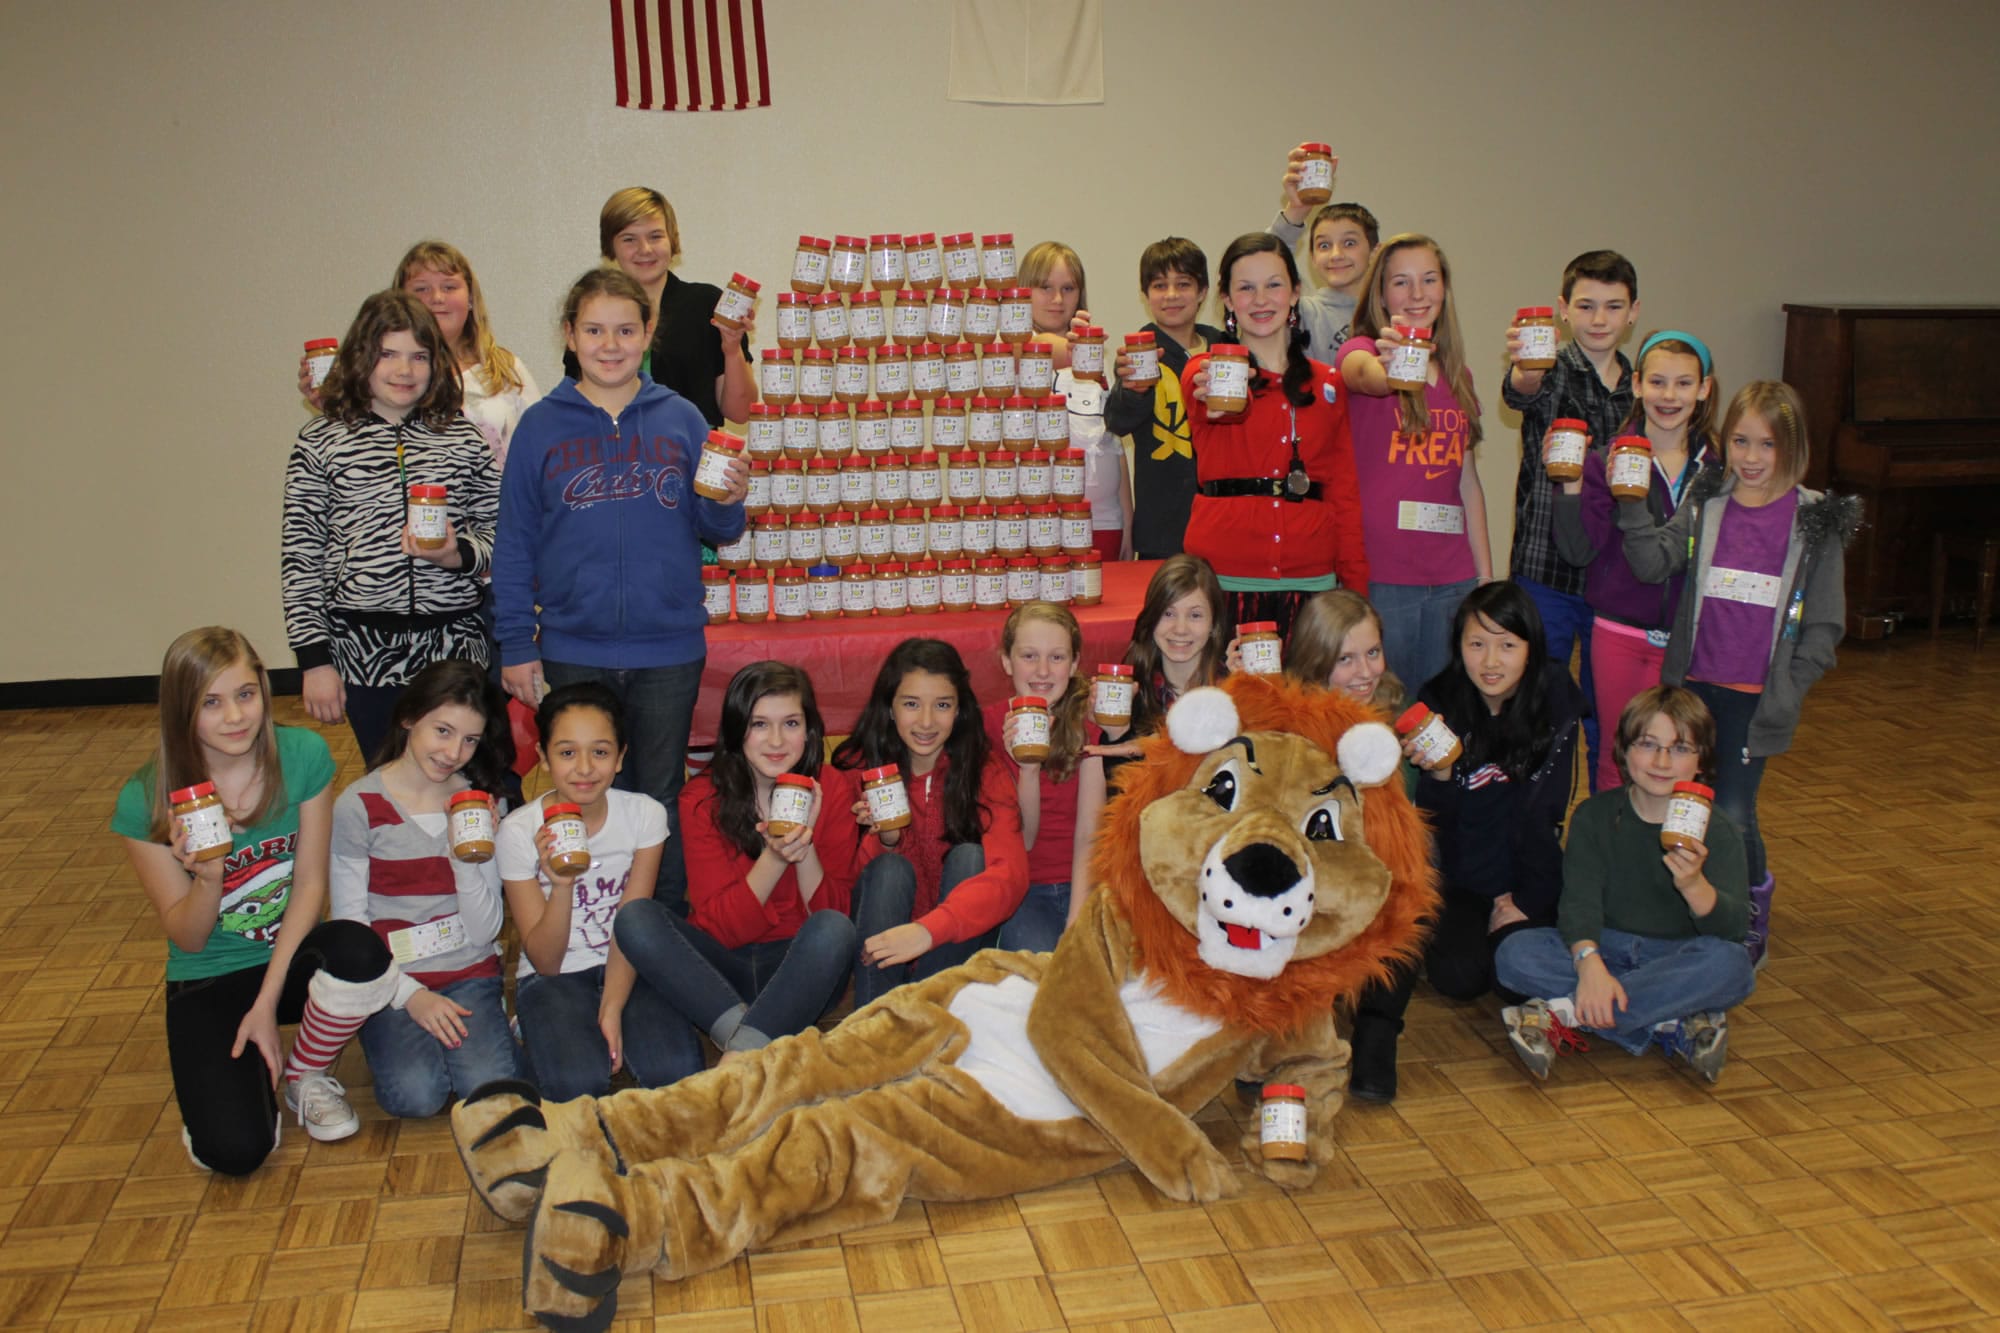 Andresen/St. Johns: Students at Cornerstone Christian School teamed up with Clark County's Joy Team for its PB &amp; Joy Project, already bringing in more than 100 jars of peanut butter for the Share charity.